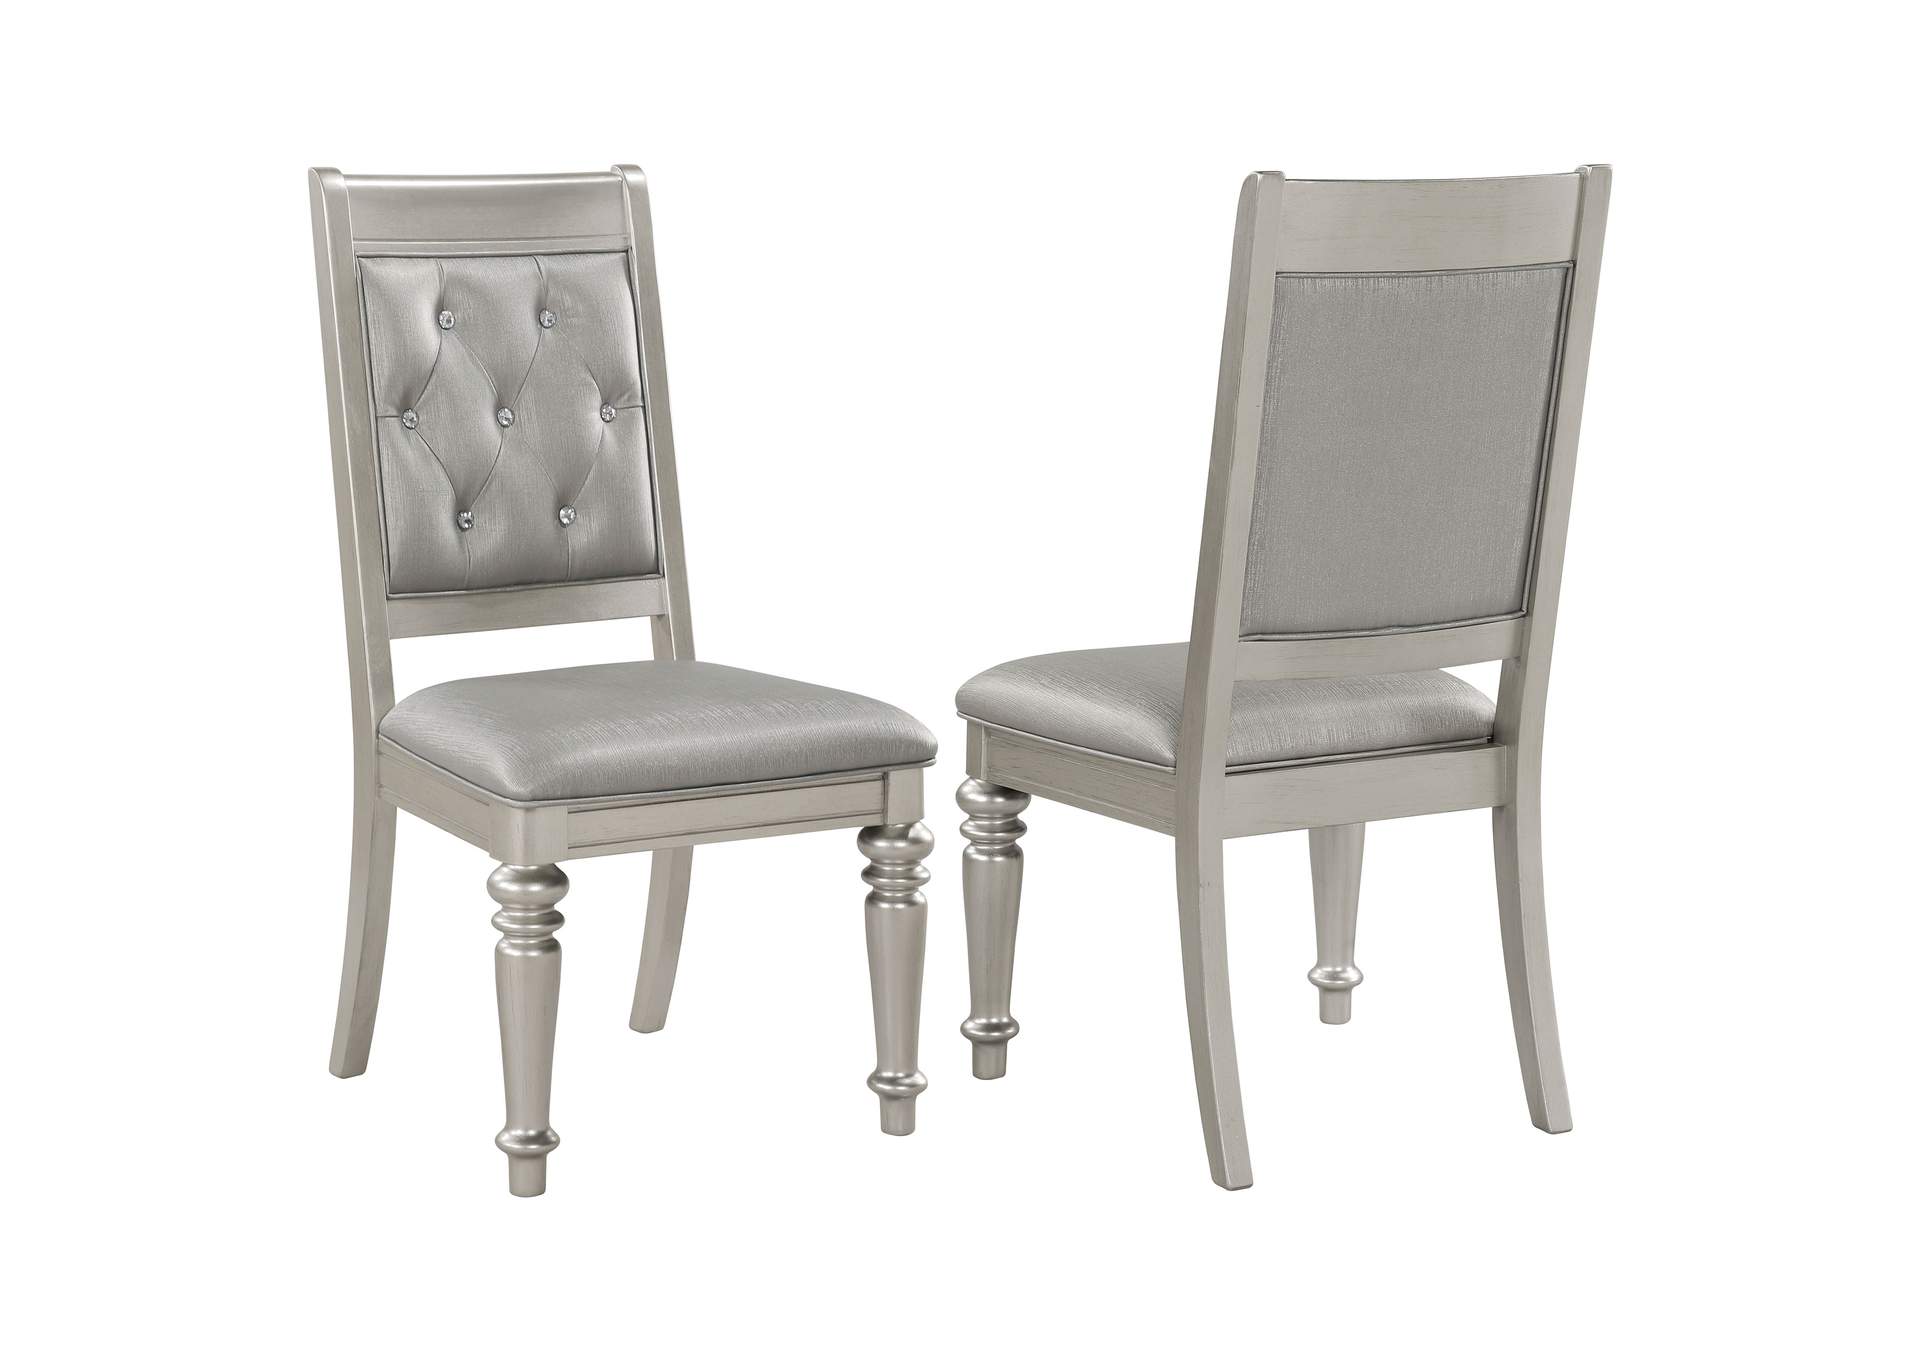 Danette Open Back Side Chairs Metallic (Set of 2),Coaster Furniture